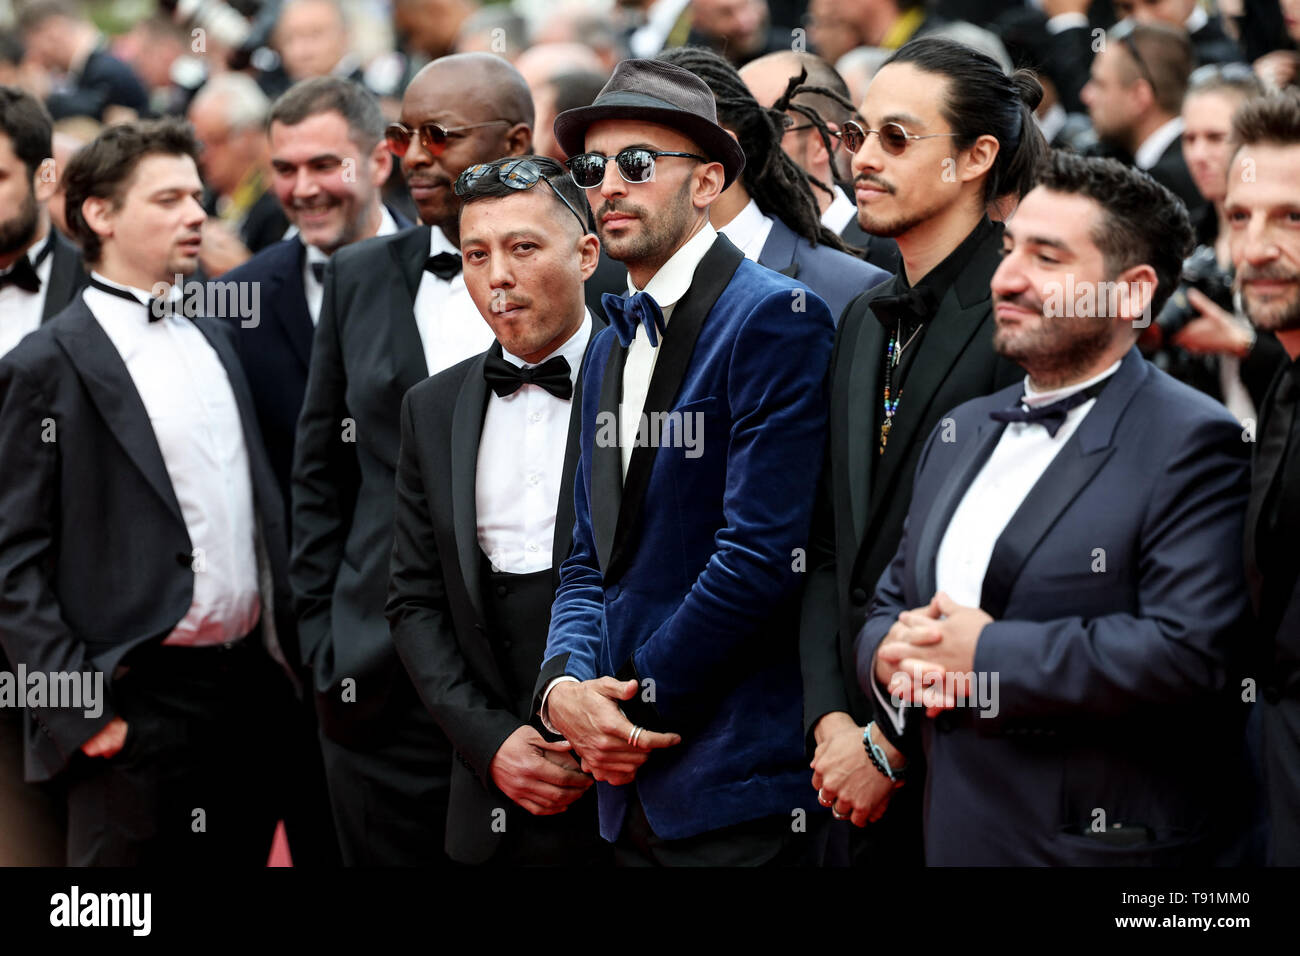 Cannes. 15th May, 2019. JR and guests arrives to the premiere of " LES MISÉRABLES " during the 2019 Cannes Film Festival on May 15, 2019 at Palais des Festivals in Cannes, France. ( Credit: Lyvans Boolaky/Image Space/Media Punch)/Alamy Live News Stock Photo